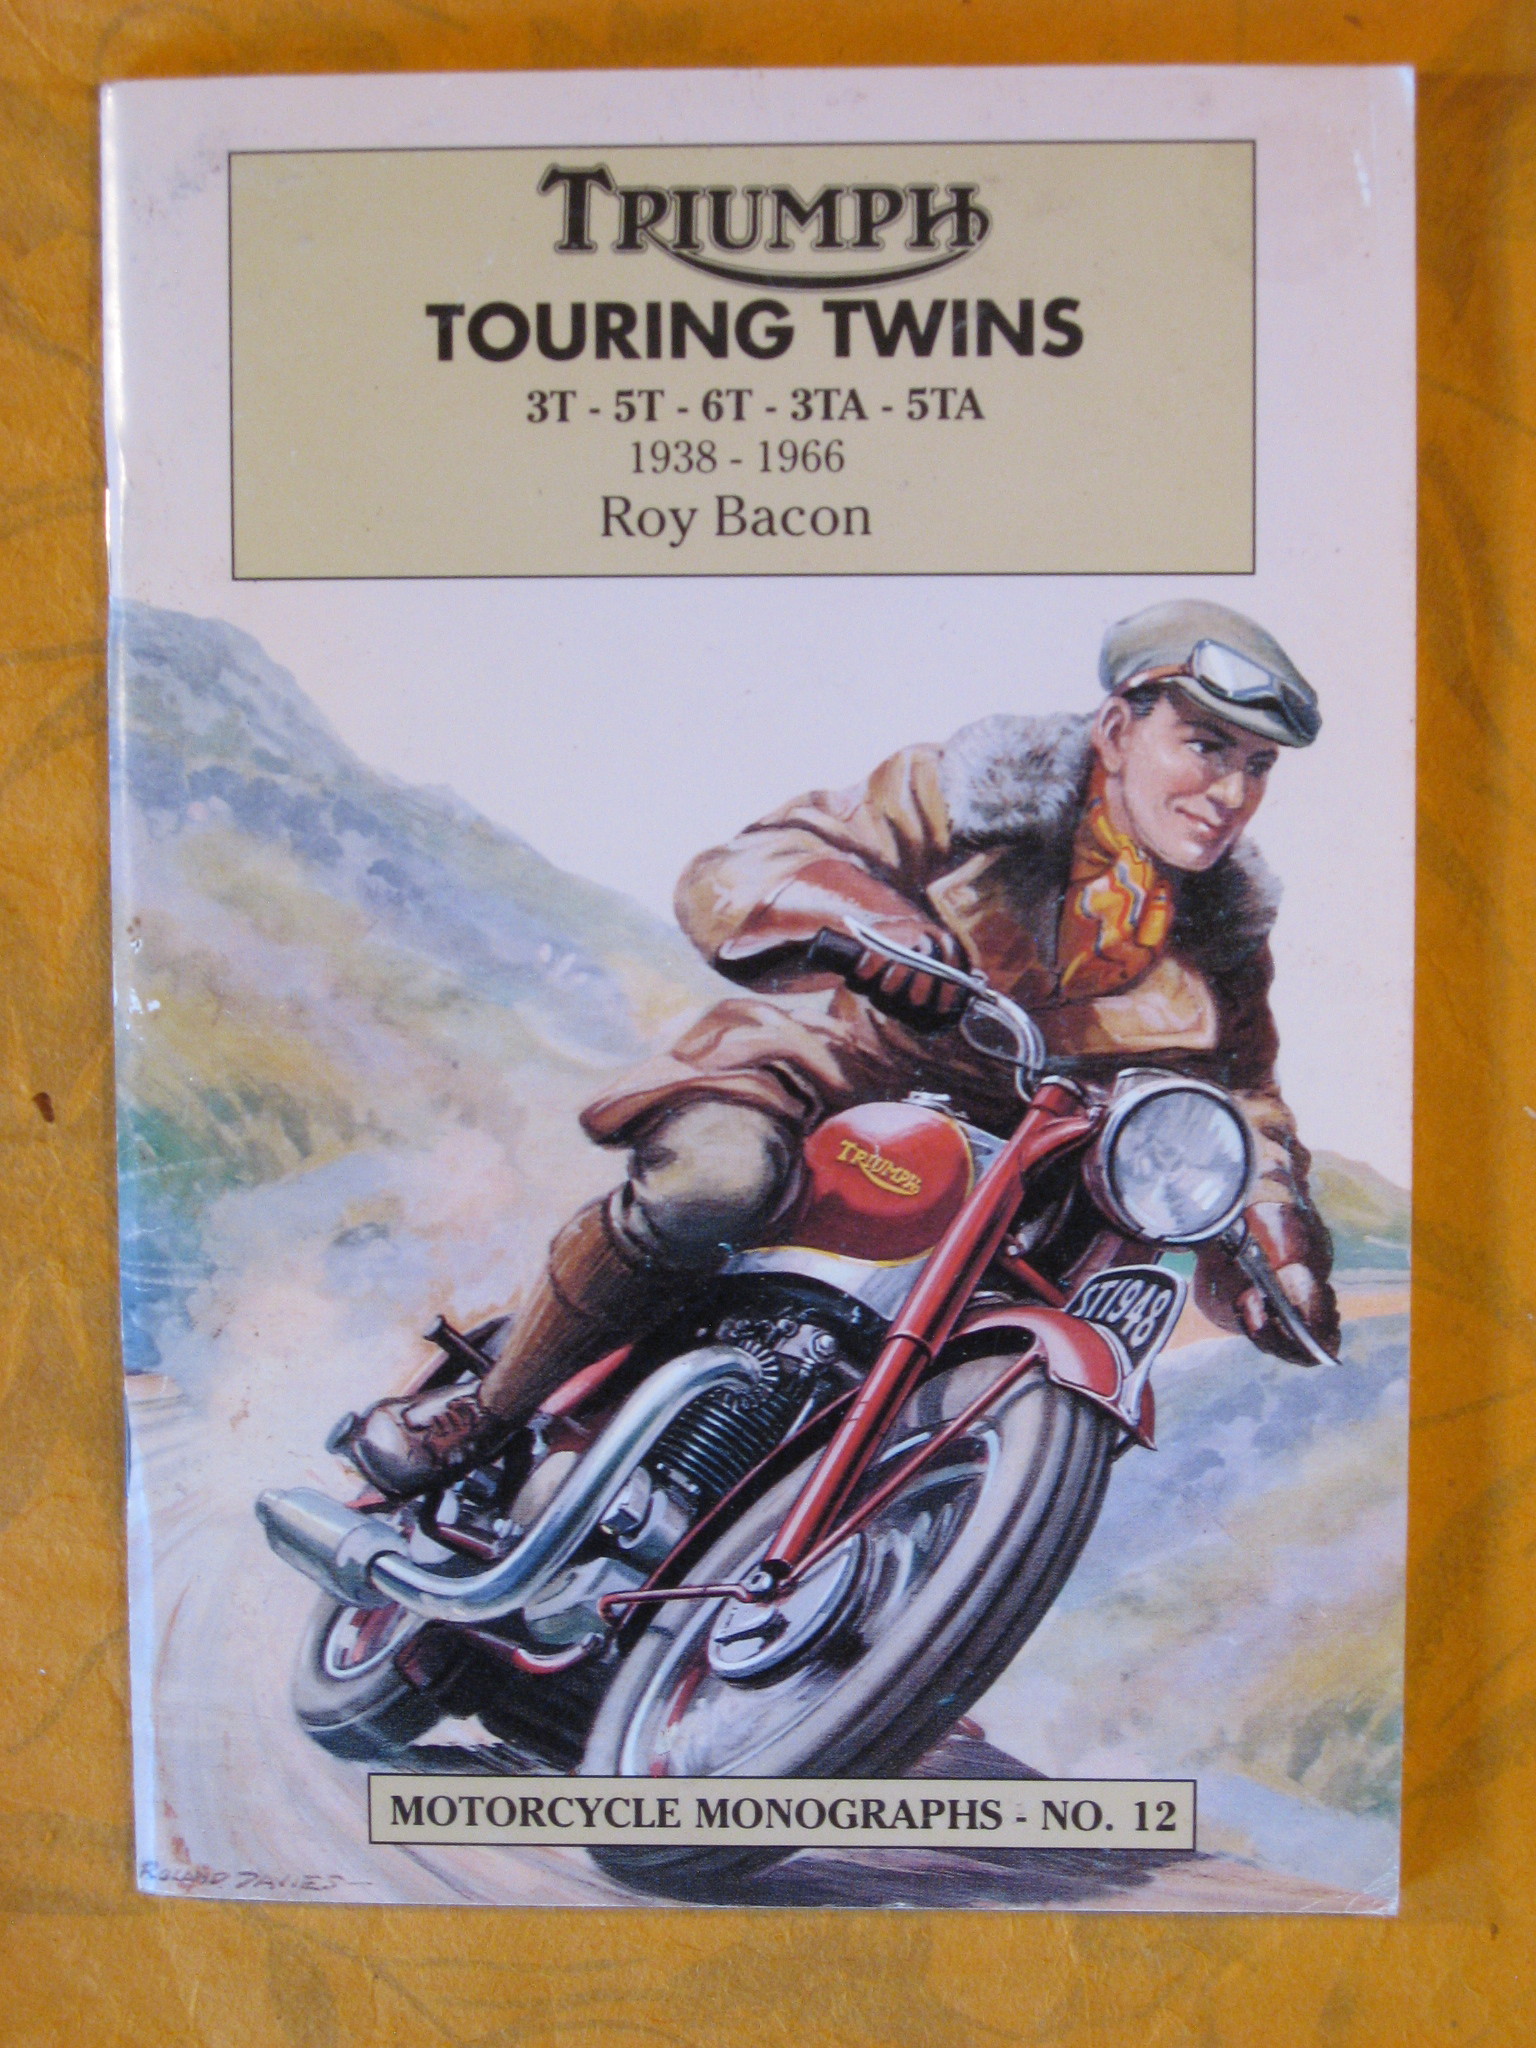 Image for Triumph Touring Twins, 3T-5T-6T-3TA-5TA, 1938-1966 (Motorcycle Monographs No. 12)